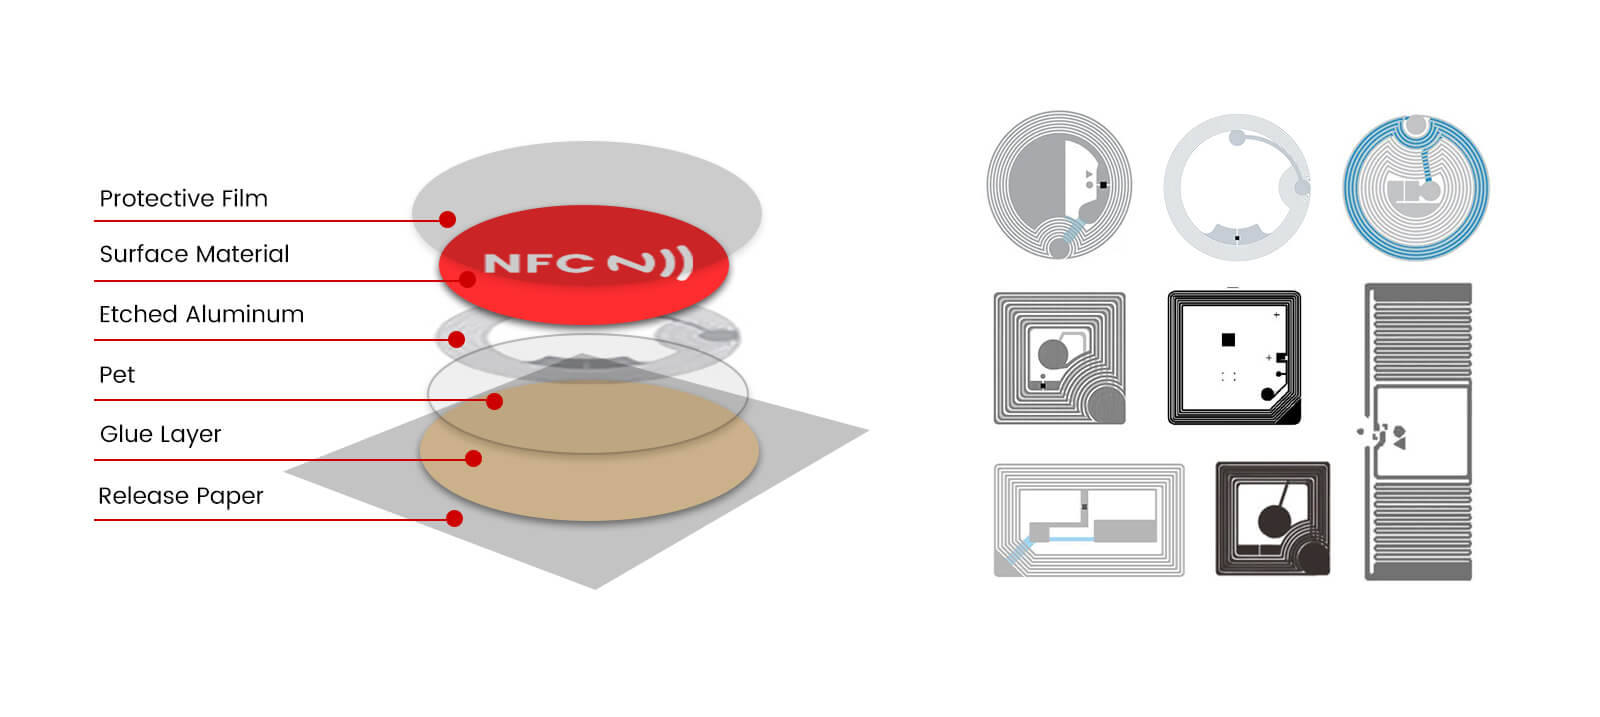 13.56MHz Programmable NFC Tag